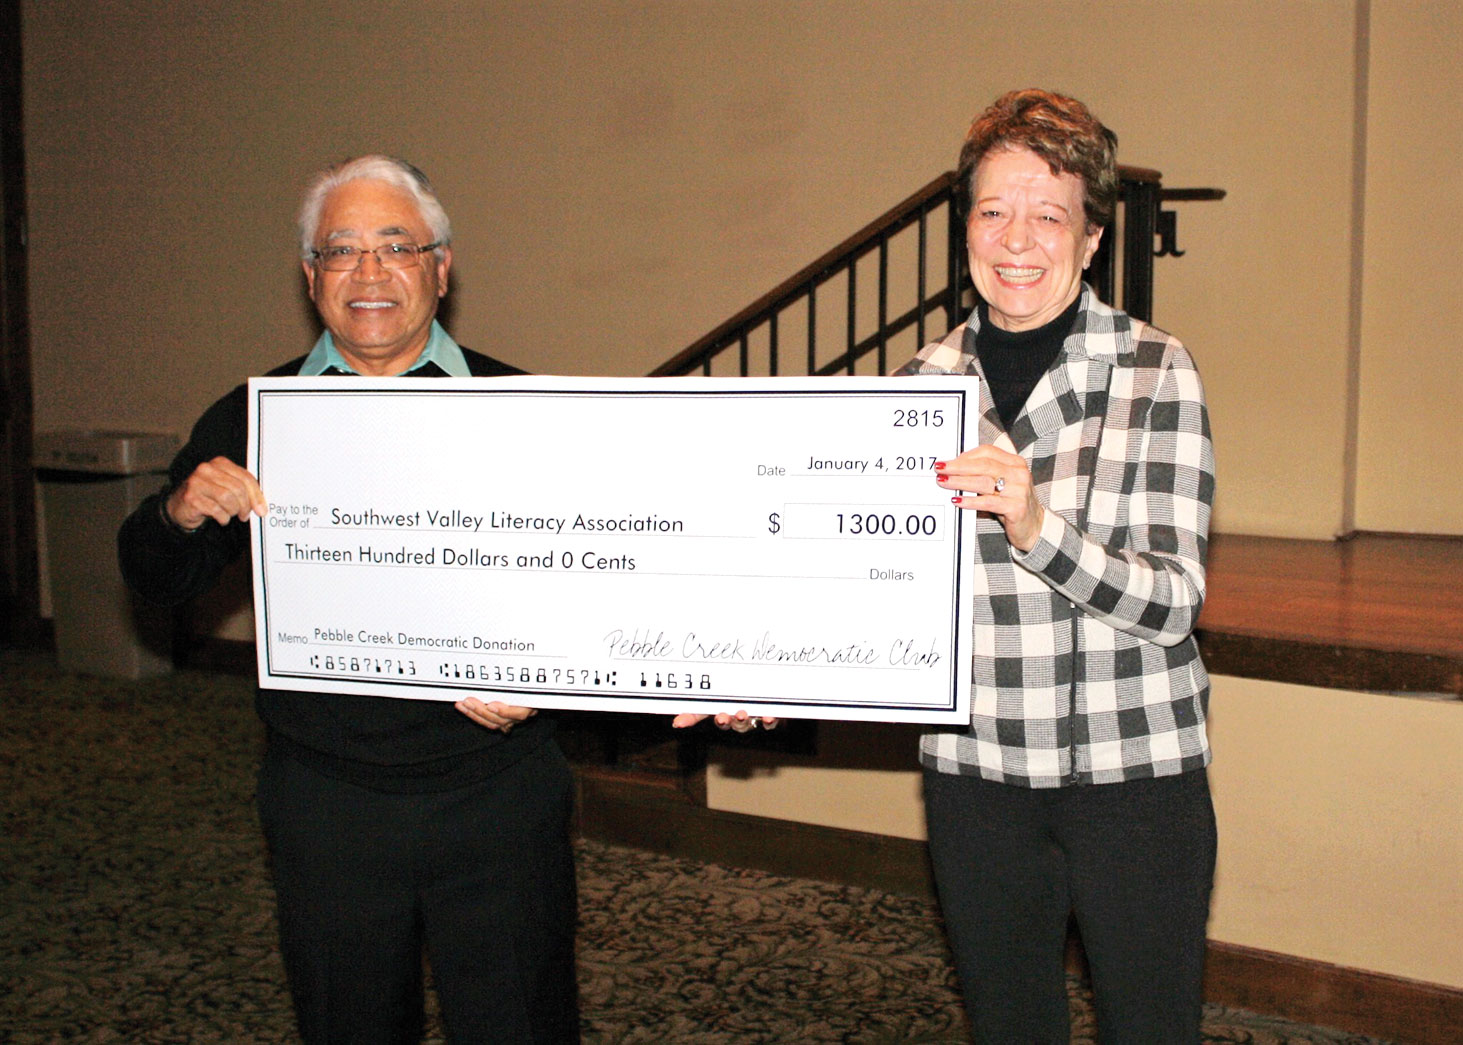 Bart Alford awards check to Jan Cosgrove of SWVLA